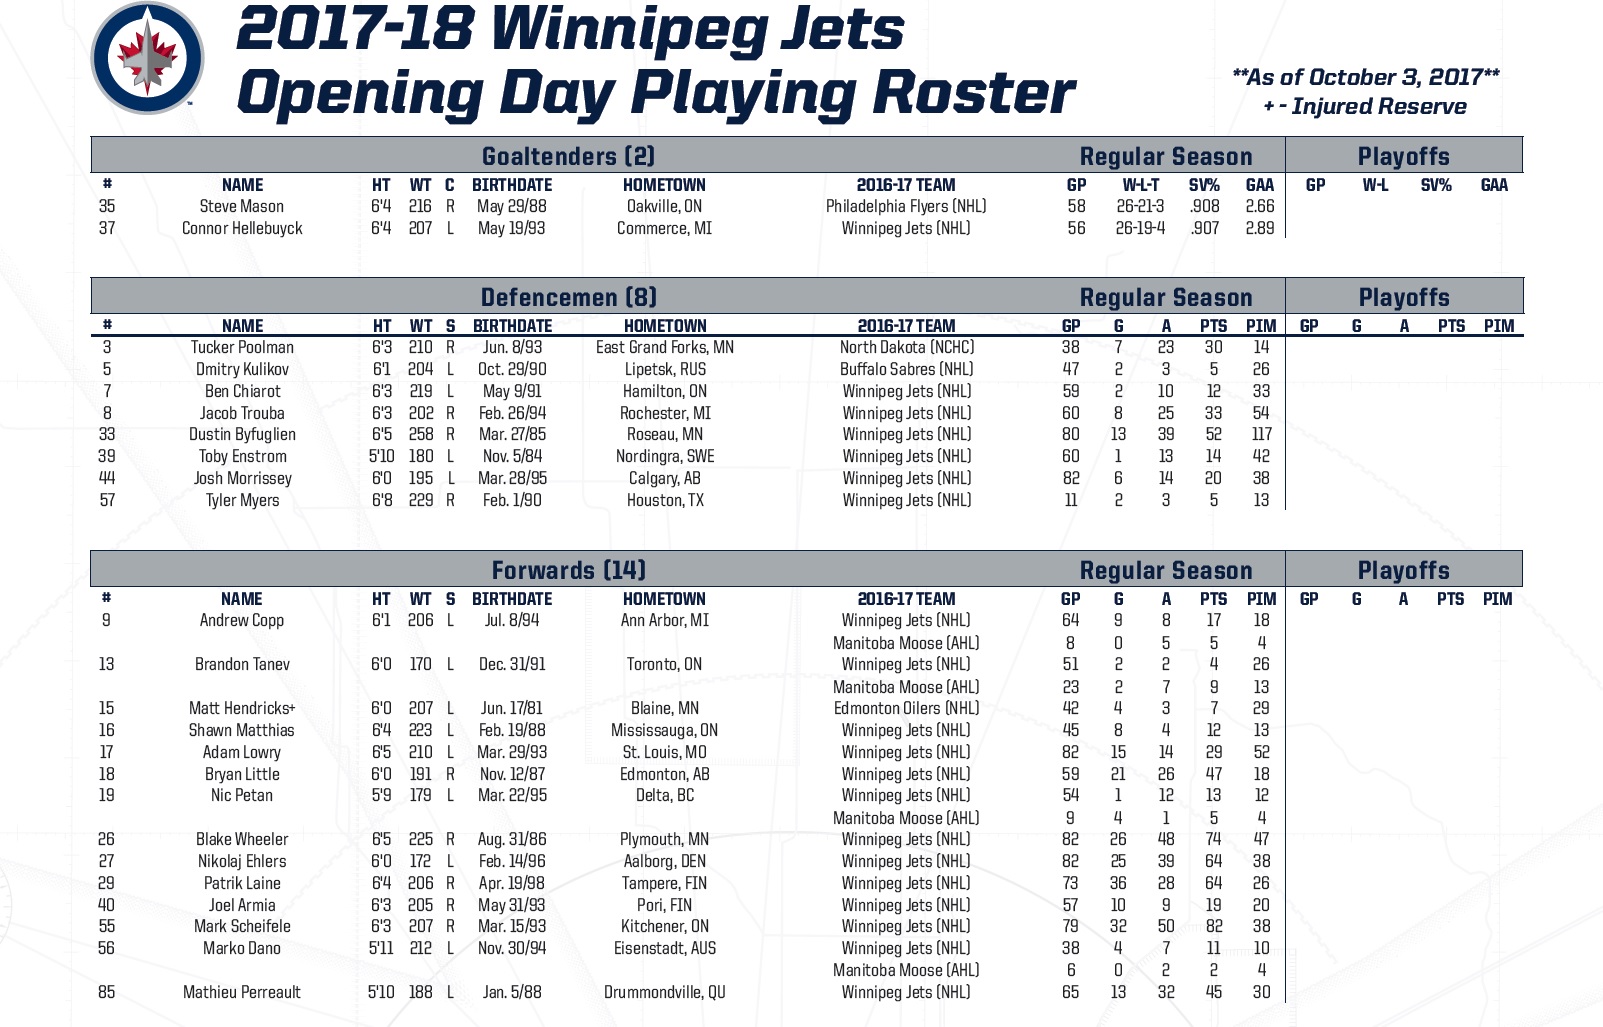 Winnipeg Jets assign Kyle Connor to 